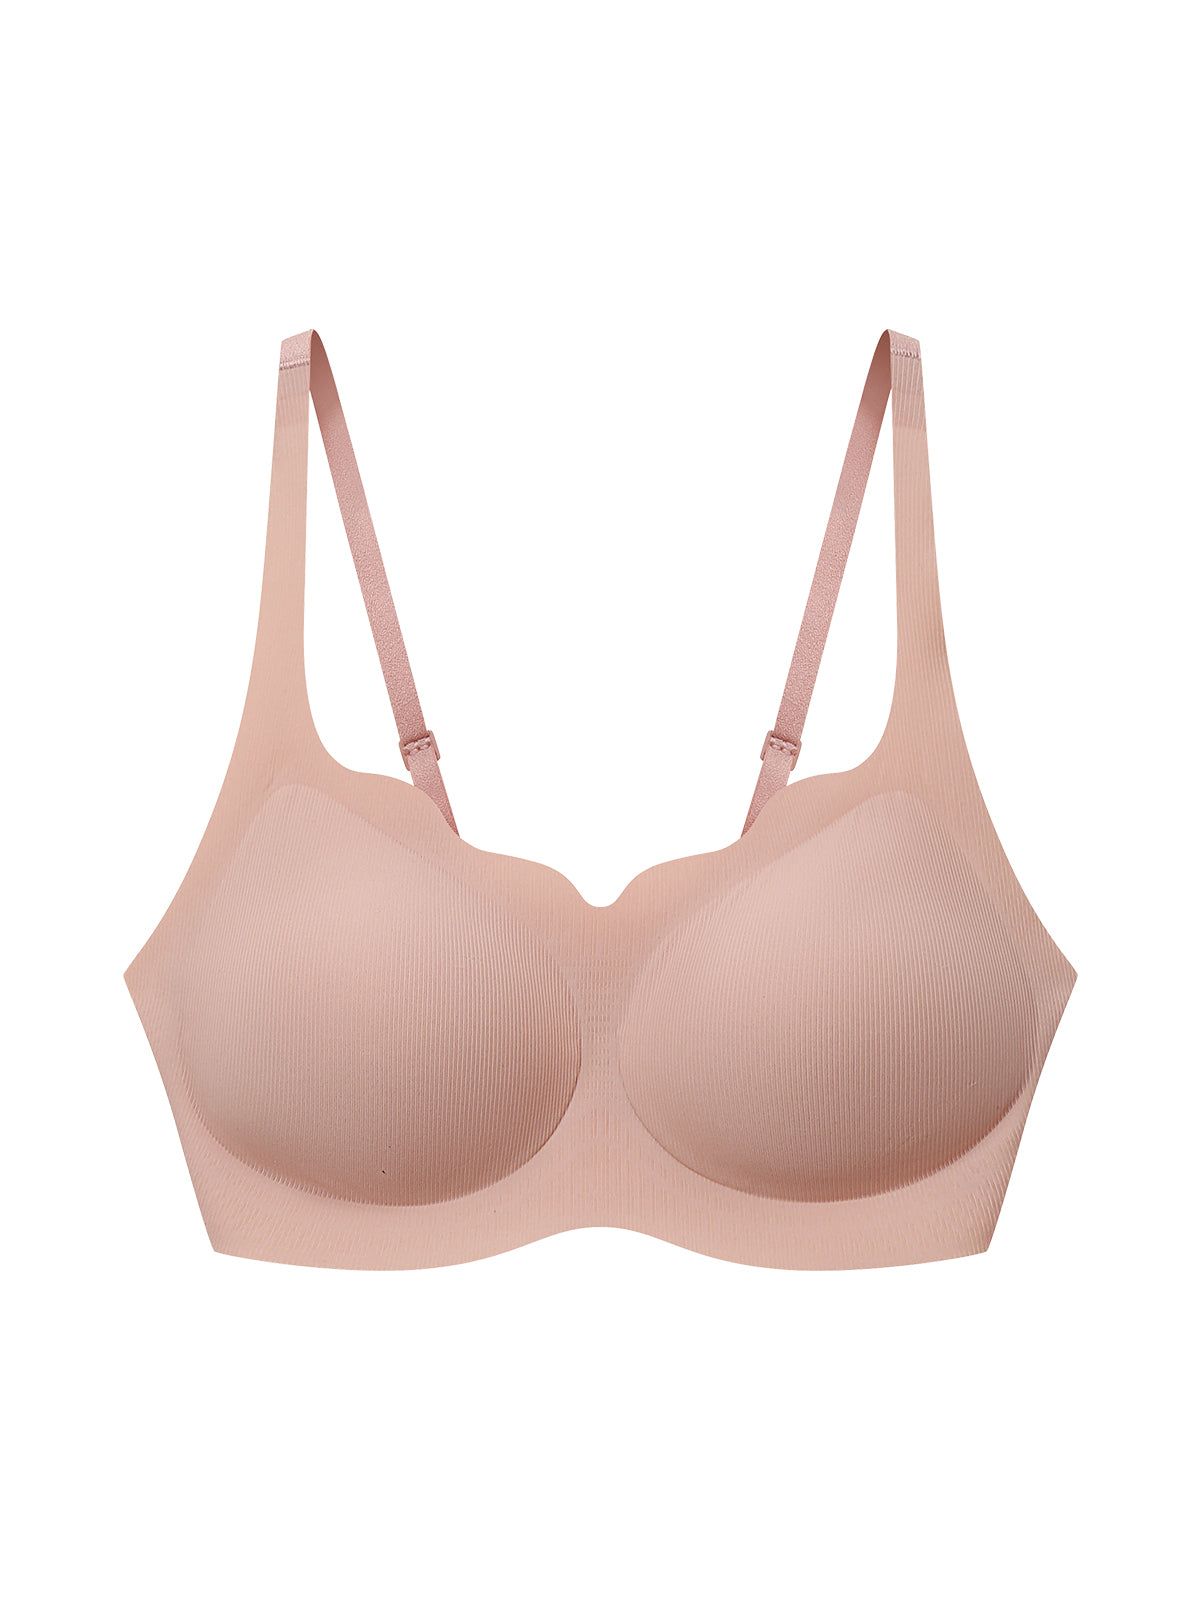 Breeze In Support Ribbed Wavy Collar Cooling Bra – ubras